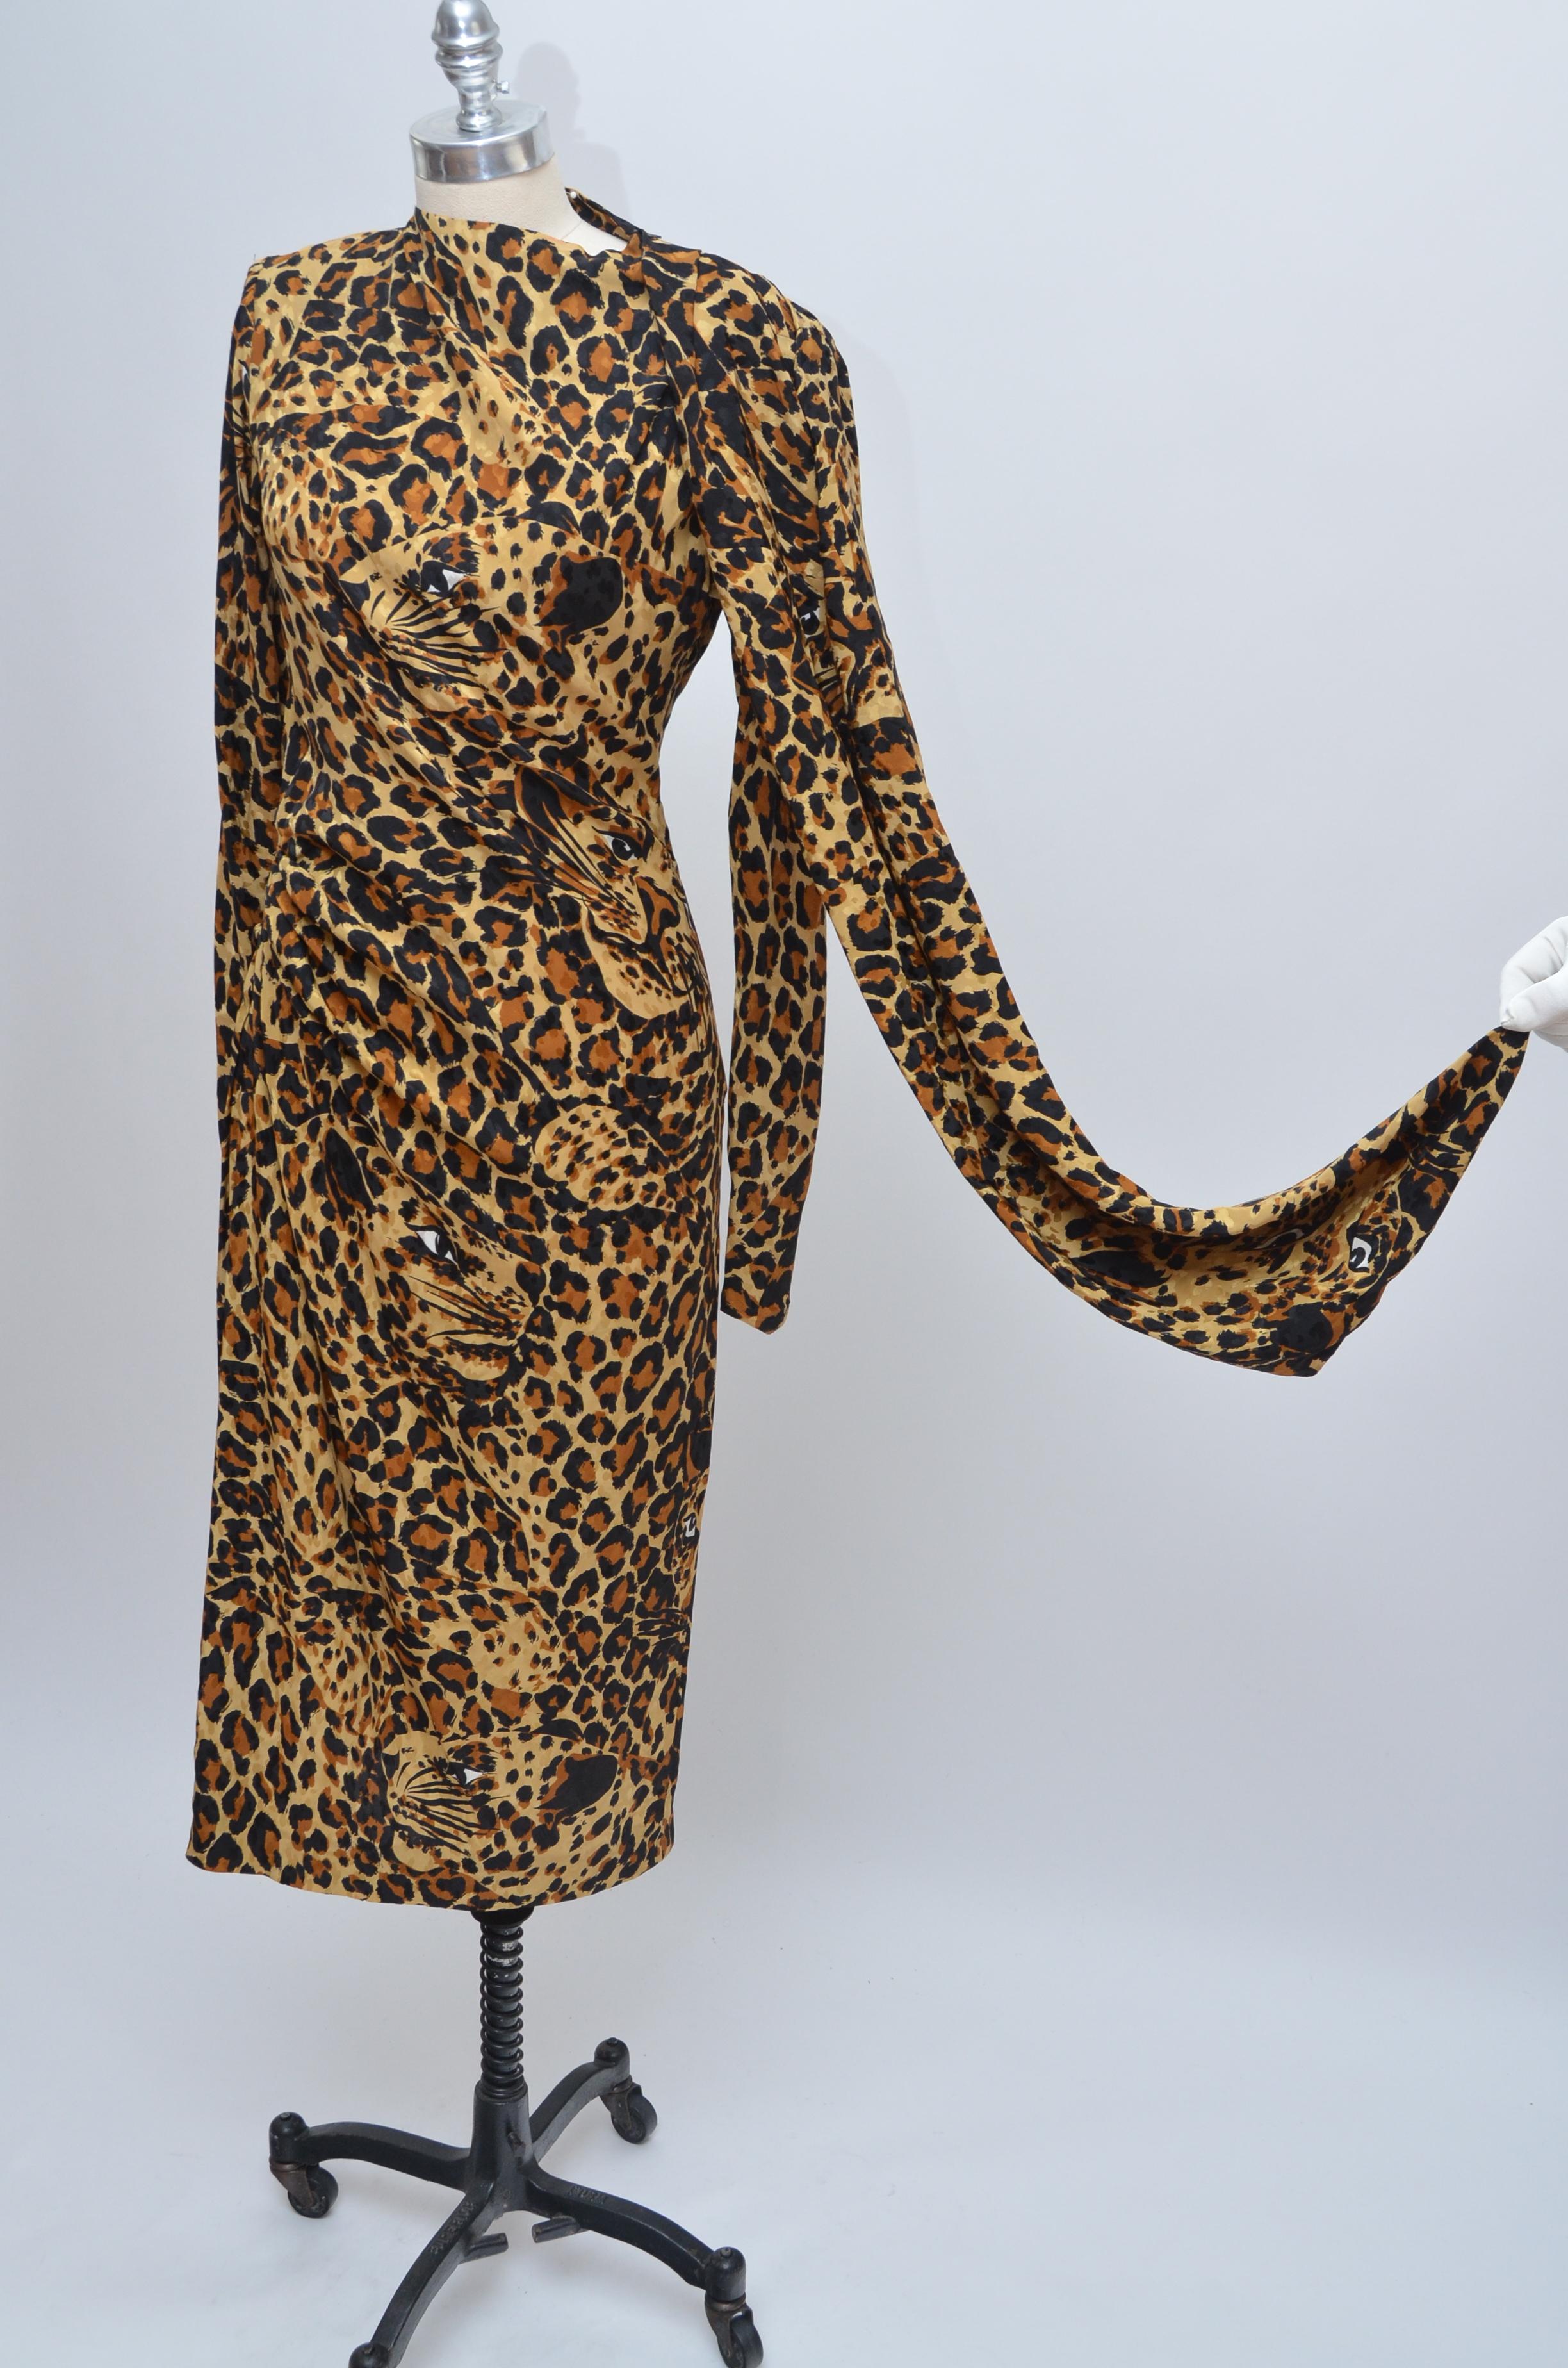 Iconic Yves Saint Laurent Rive Gauche 1980's Cheetah Silk Dress
Brand new never worn with tag attached.
Size 42 ,run small.Photographed on mannequin size 6 US
Fabric 100
Approximate size:
Waist 31